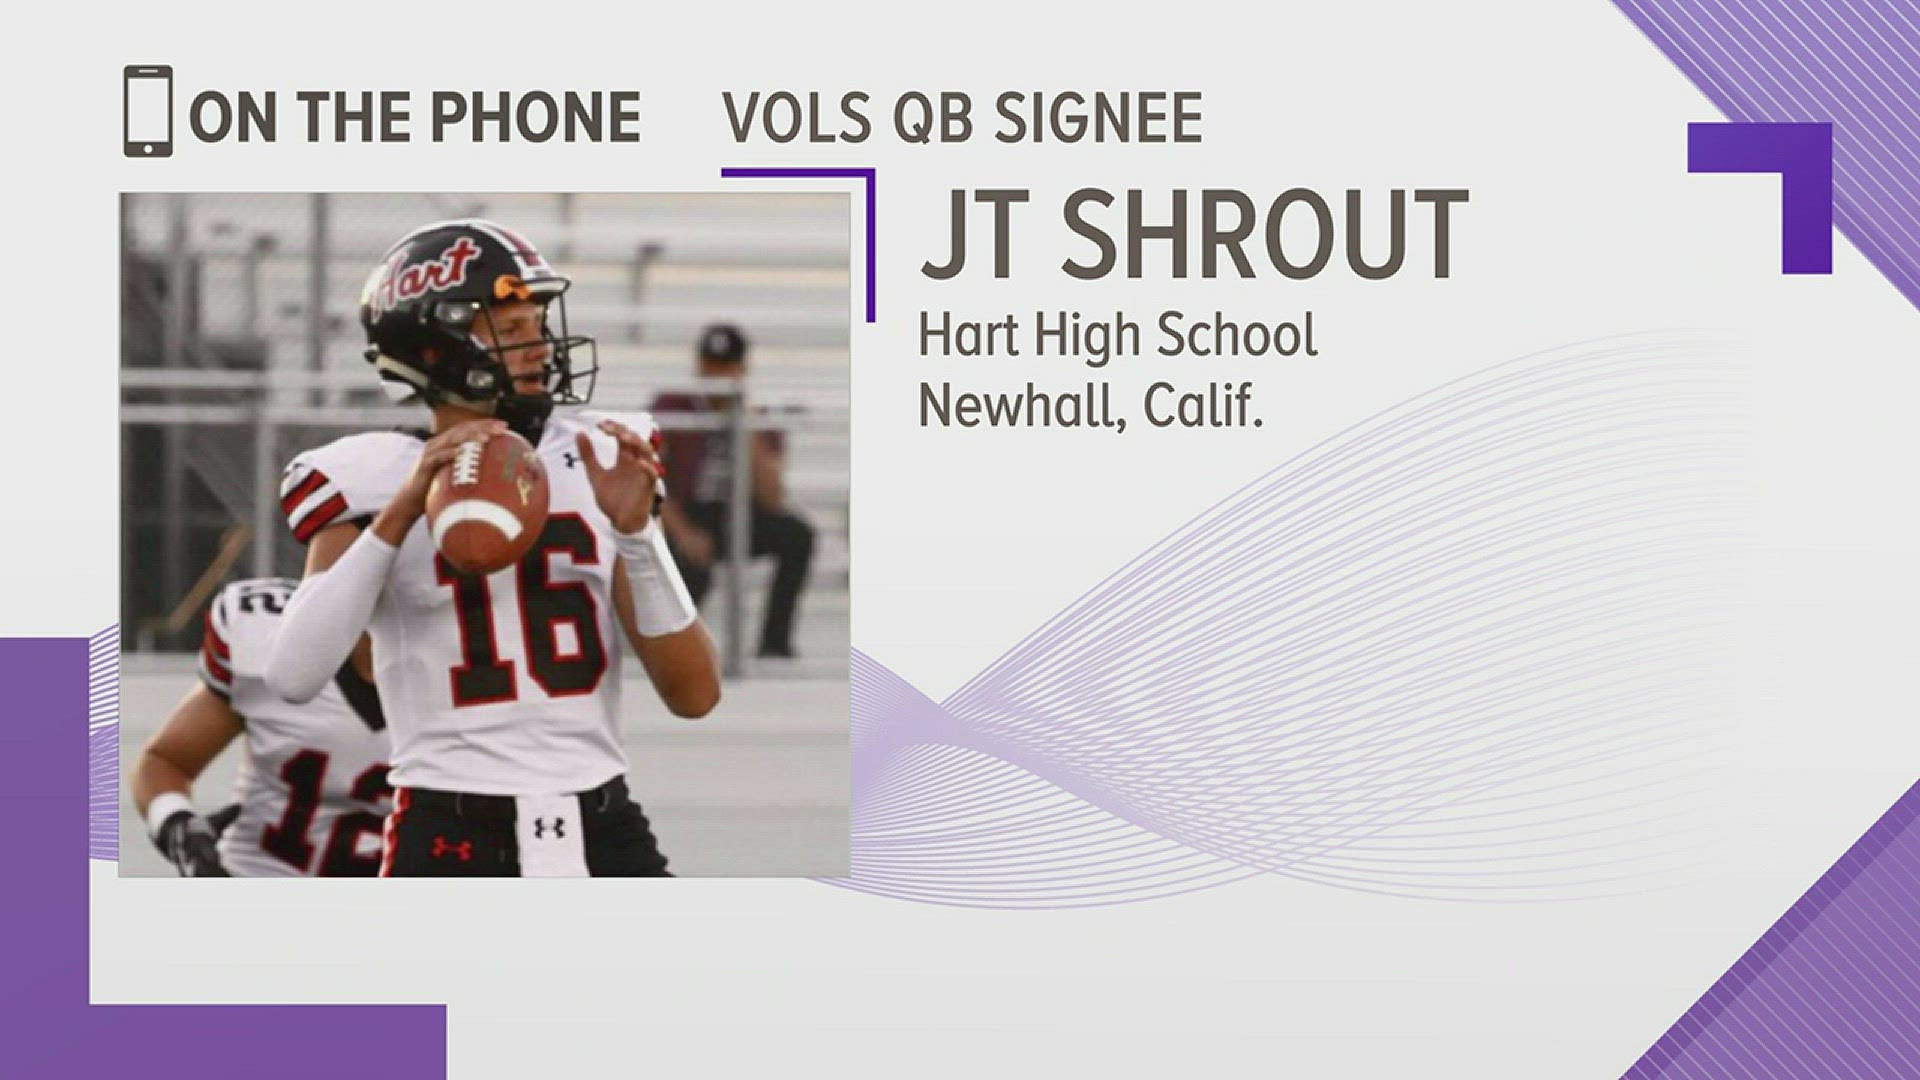 Three-star quarterback from California, JT Shrout picked the Vols on Wednesday, signing with Tennessee a day after decommitting from Cal. WBIR 10Sports Anchor Patrick Murray interviewed Shrout on the phone on Thursday.